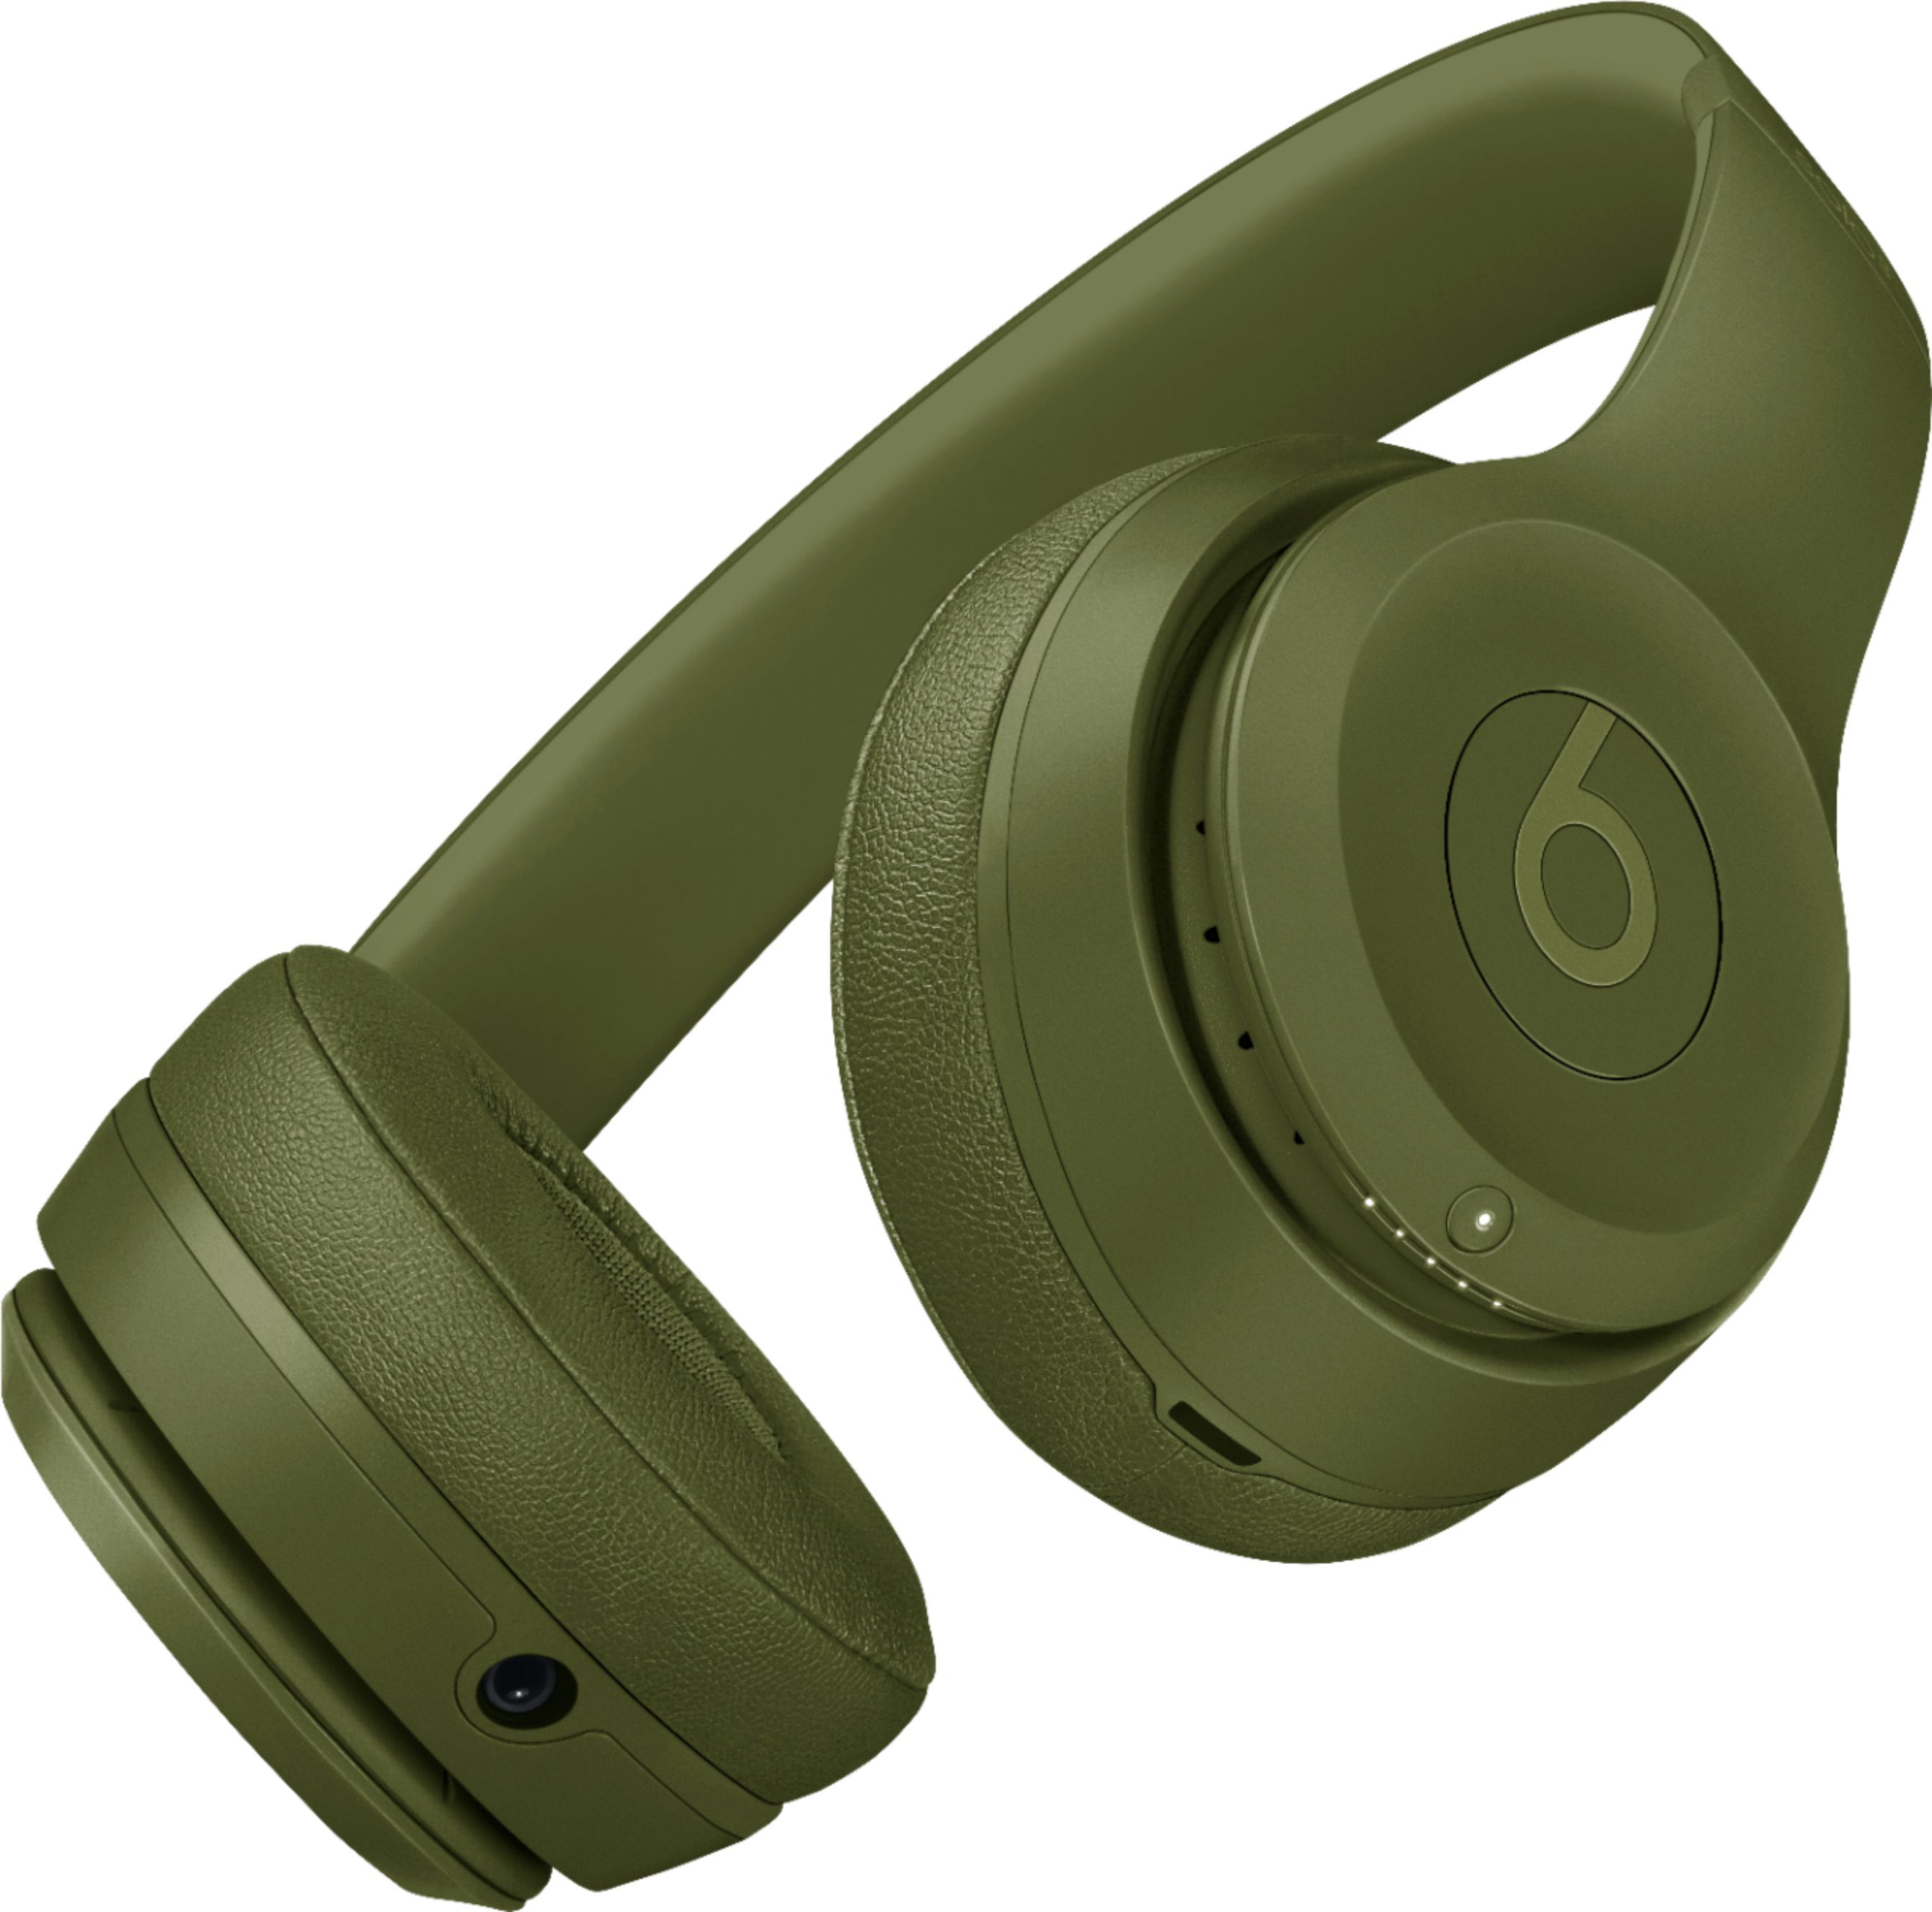 beats by dre olive green